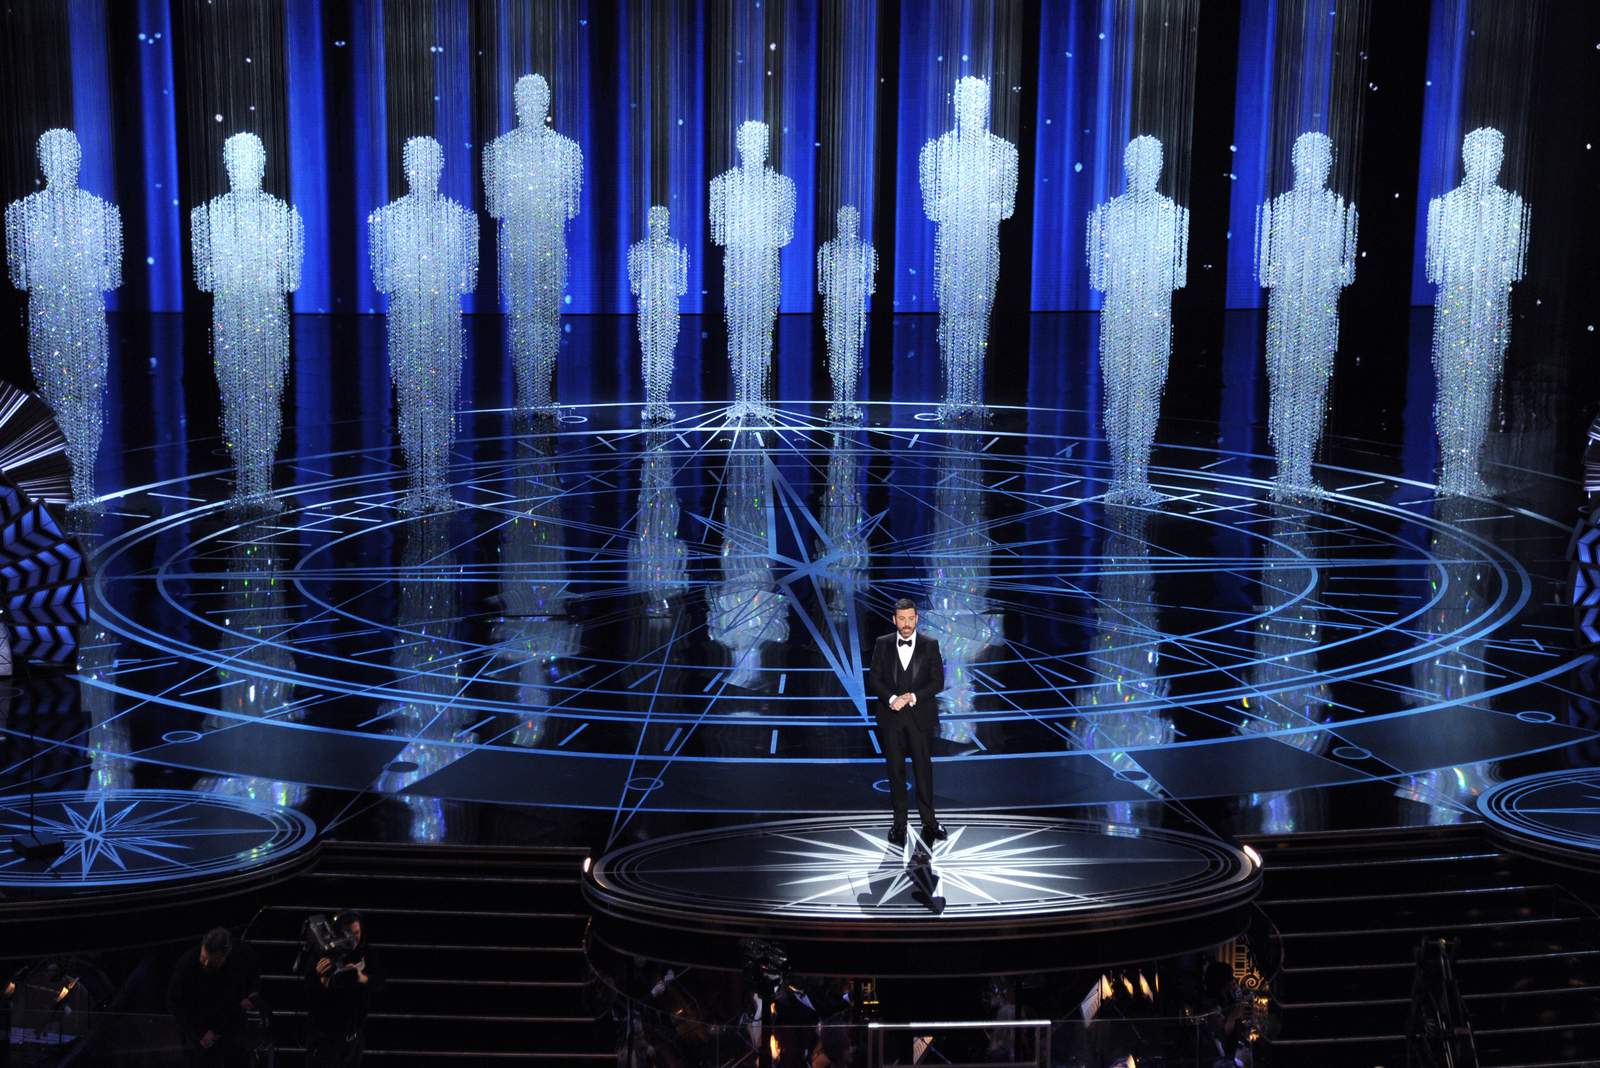 Will the Oscars be a 'who cares' moment as ratings dive?